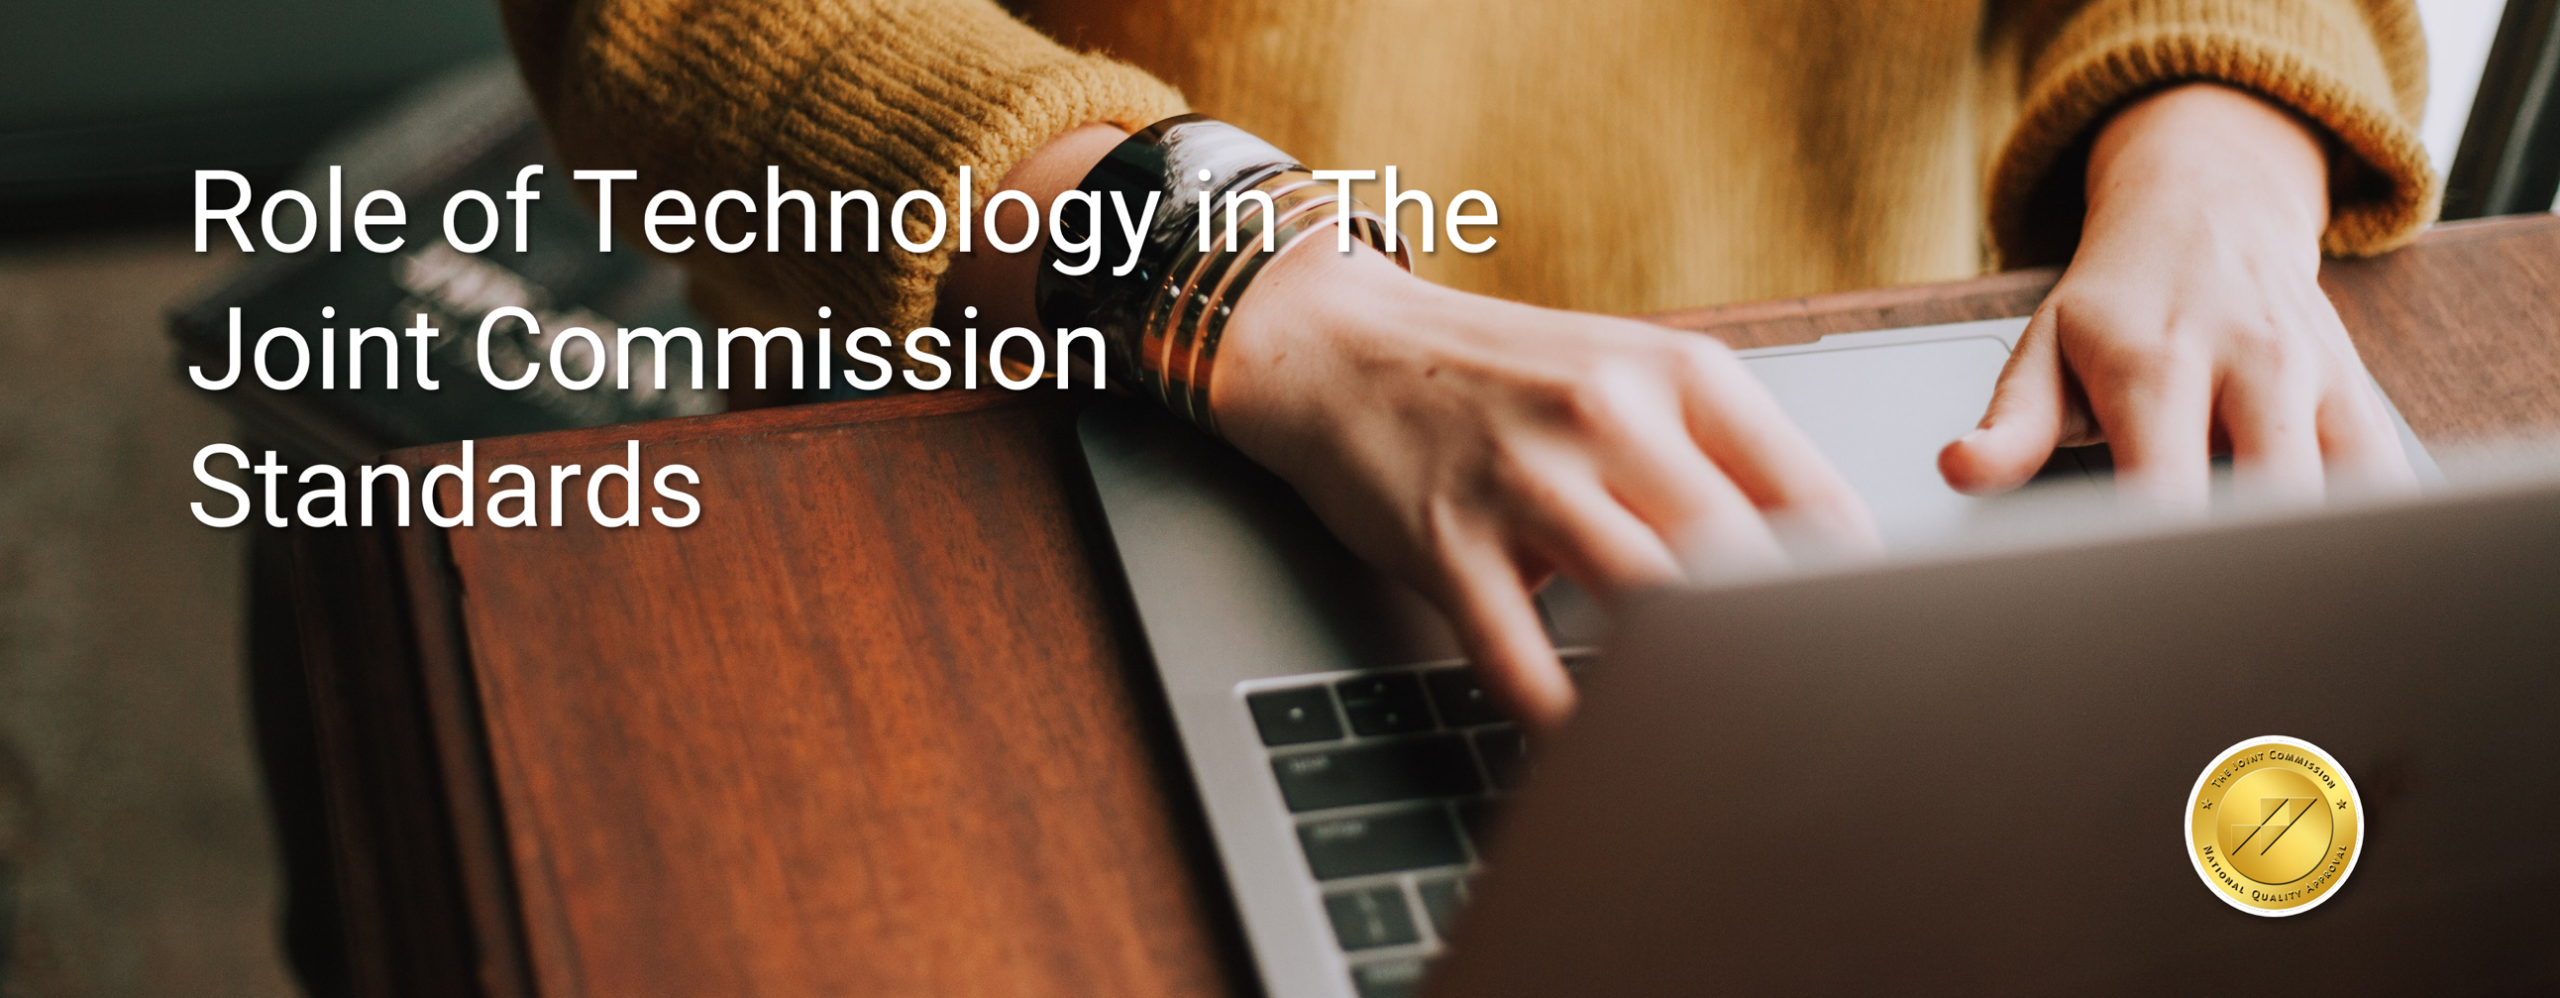 Technology And The Joint Commission